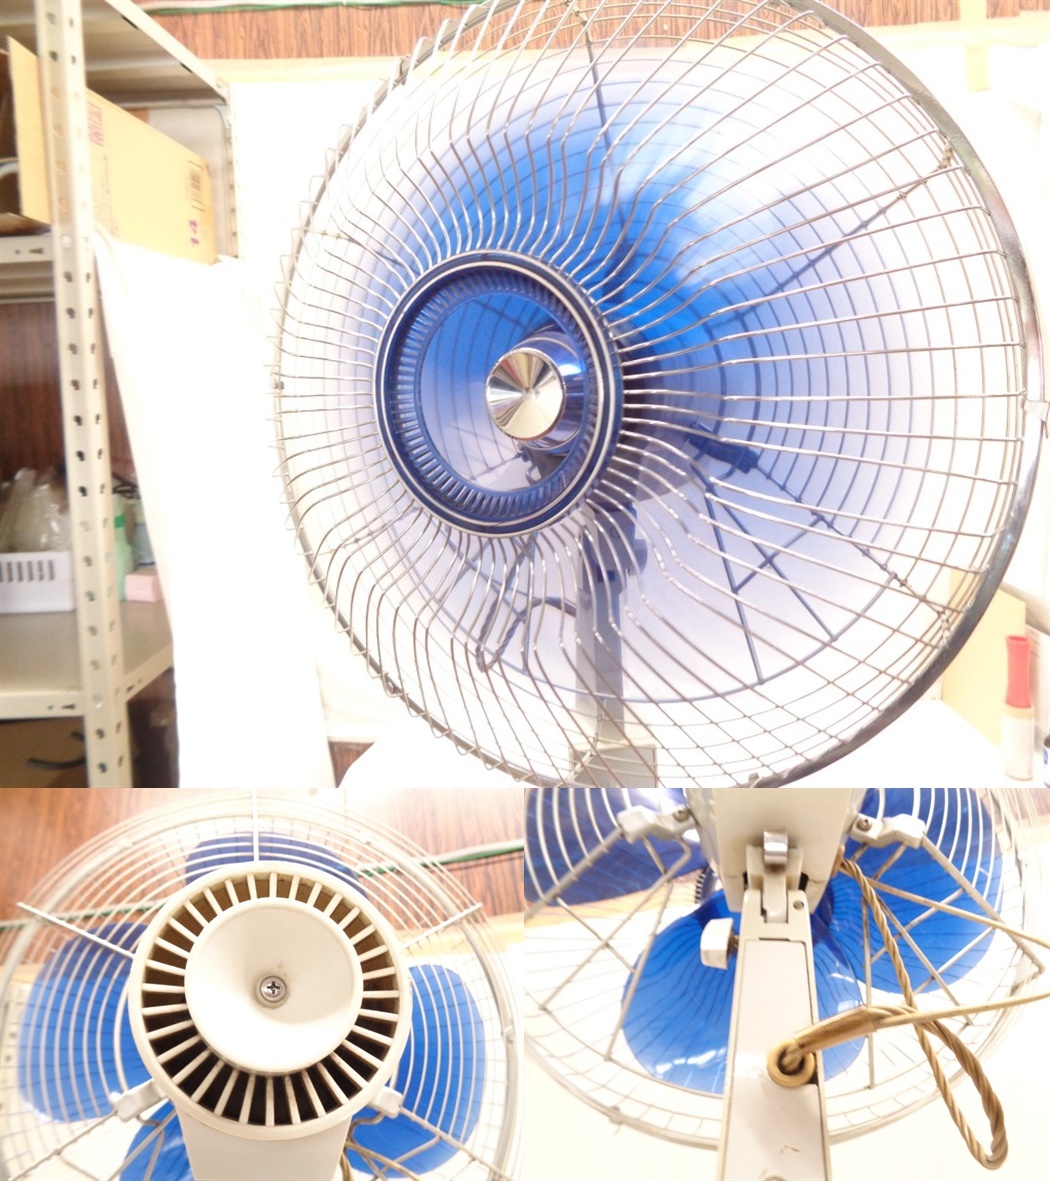 04A043 receipt recommendation [ Hokkaido white . block ] retro Toshiba SF-40H large electric fan 4 sheets wings /16×19cm operation excellent 